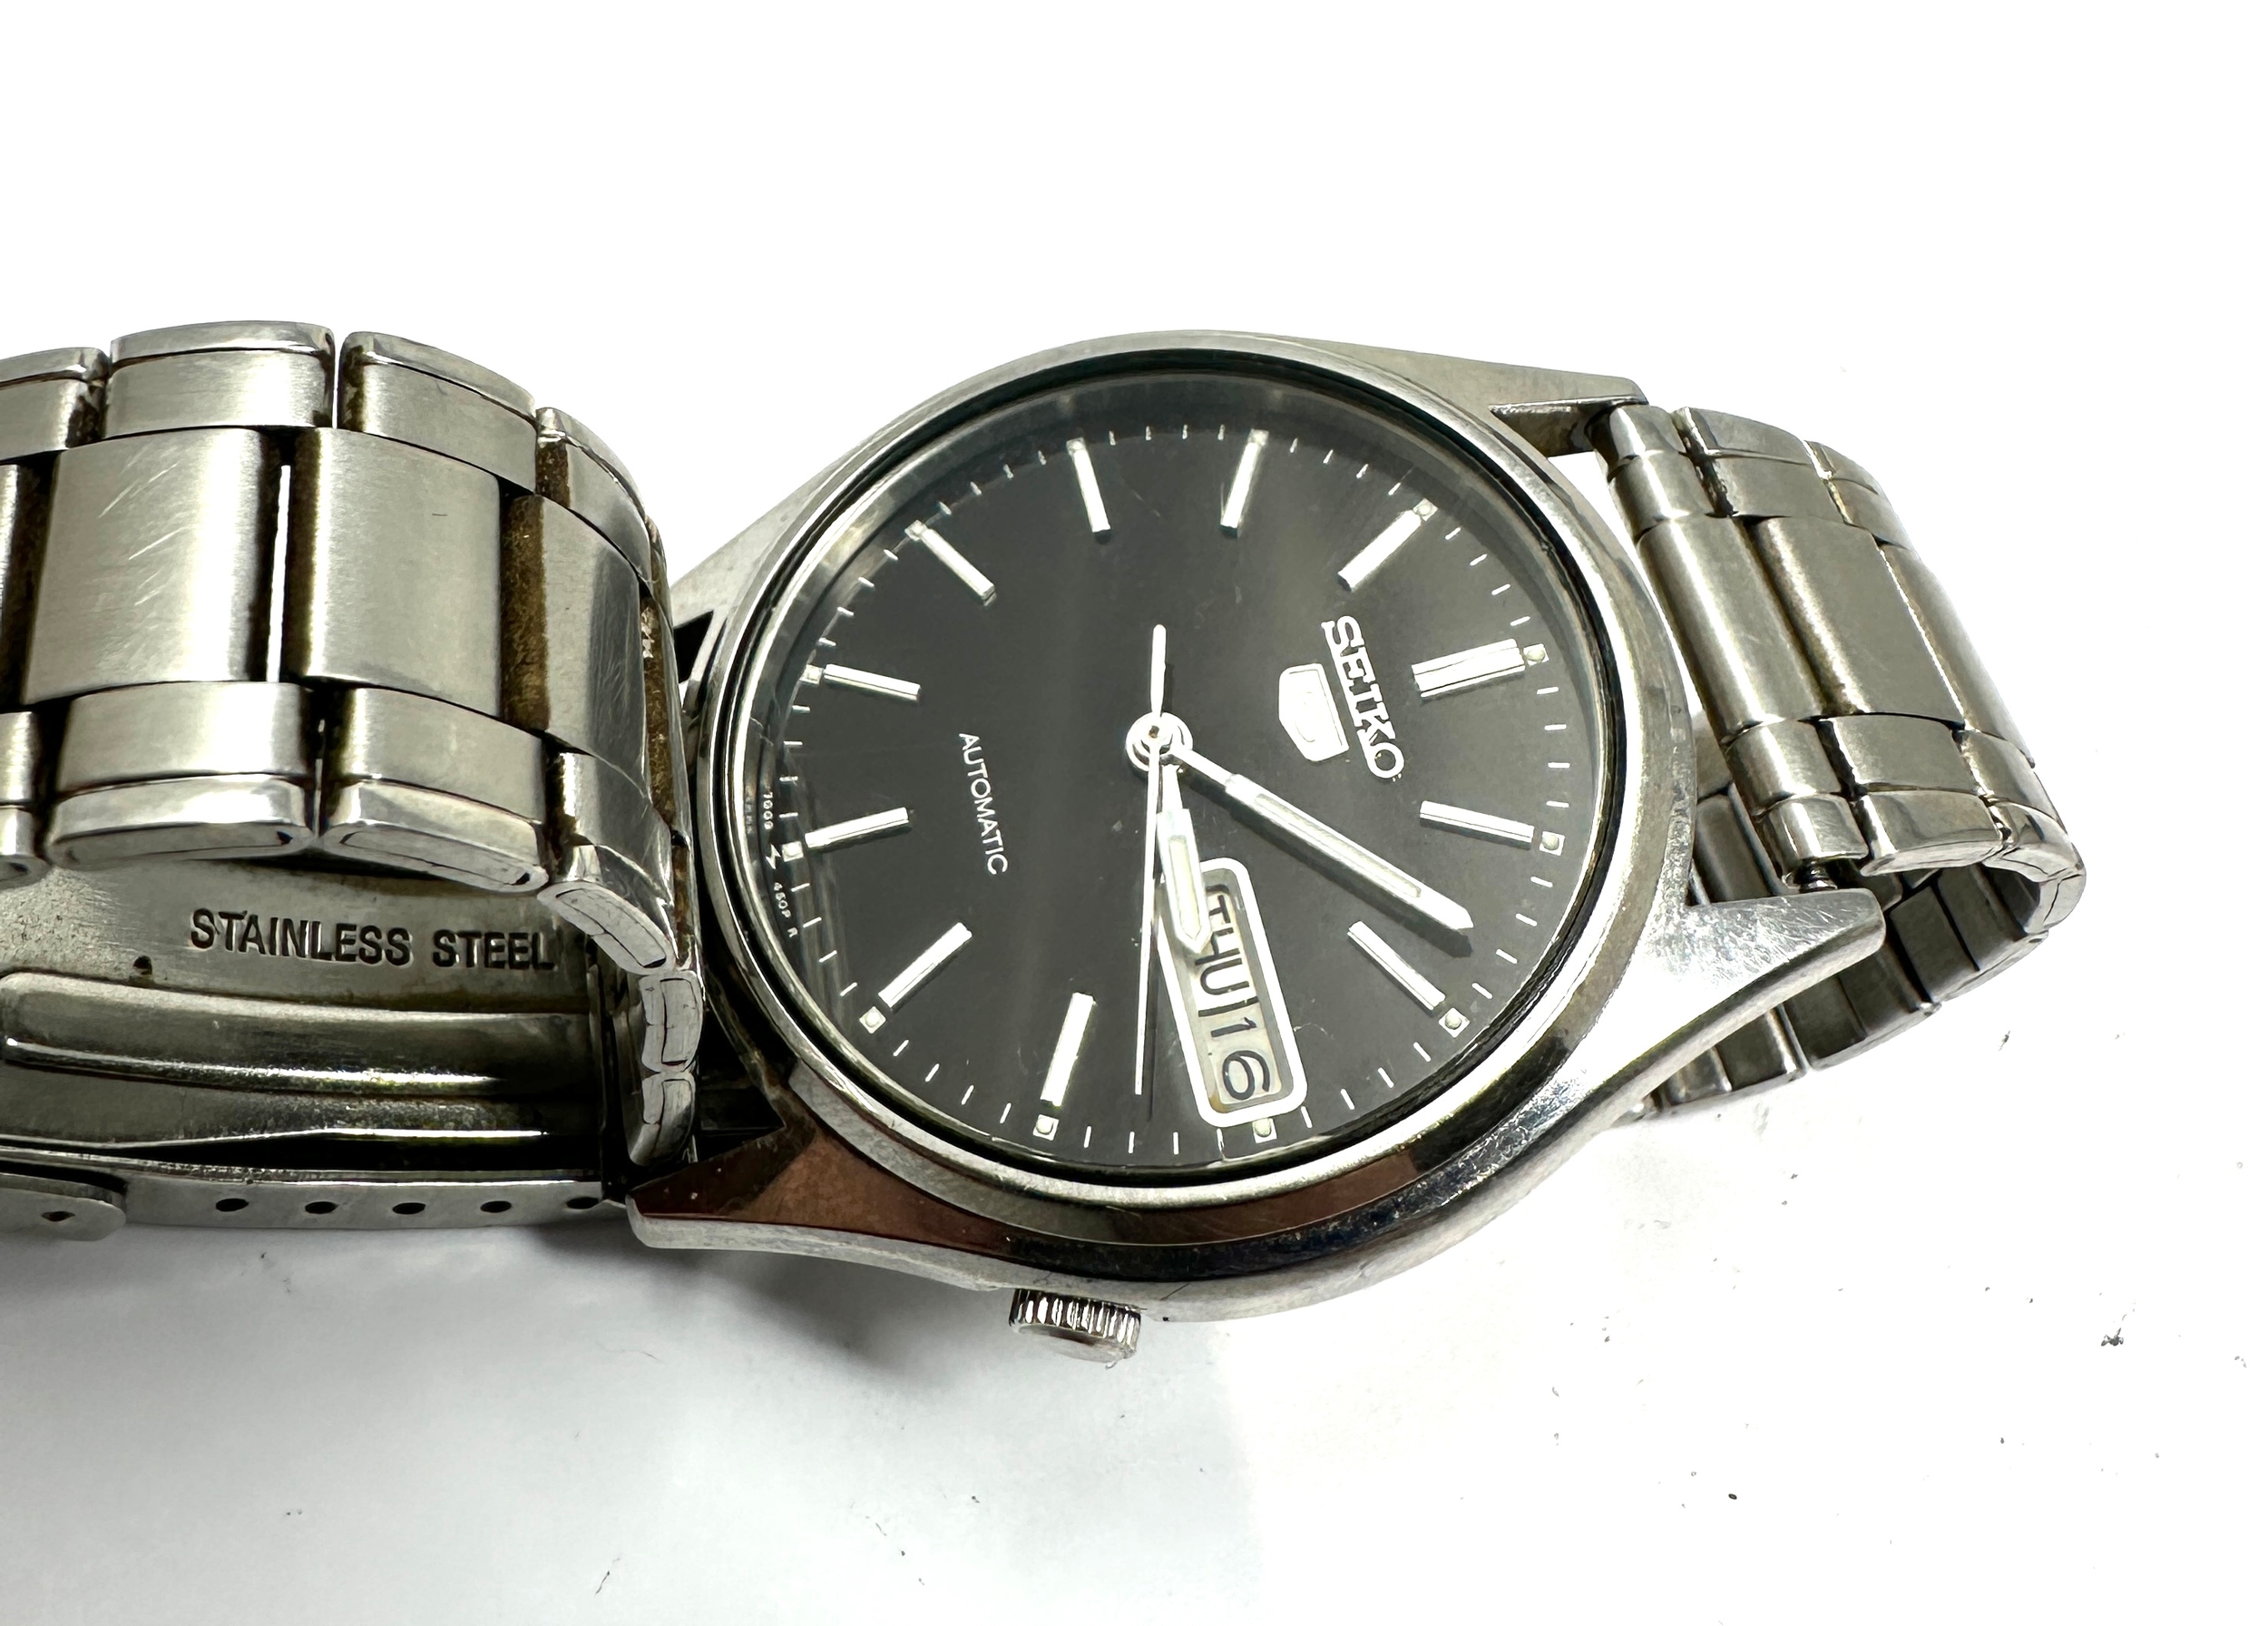 Vintage Seiko 5 Automatic Day & Date 7009 -3100 the watch is ticking black dial - Image 2 of 4